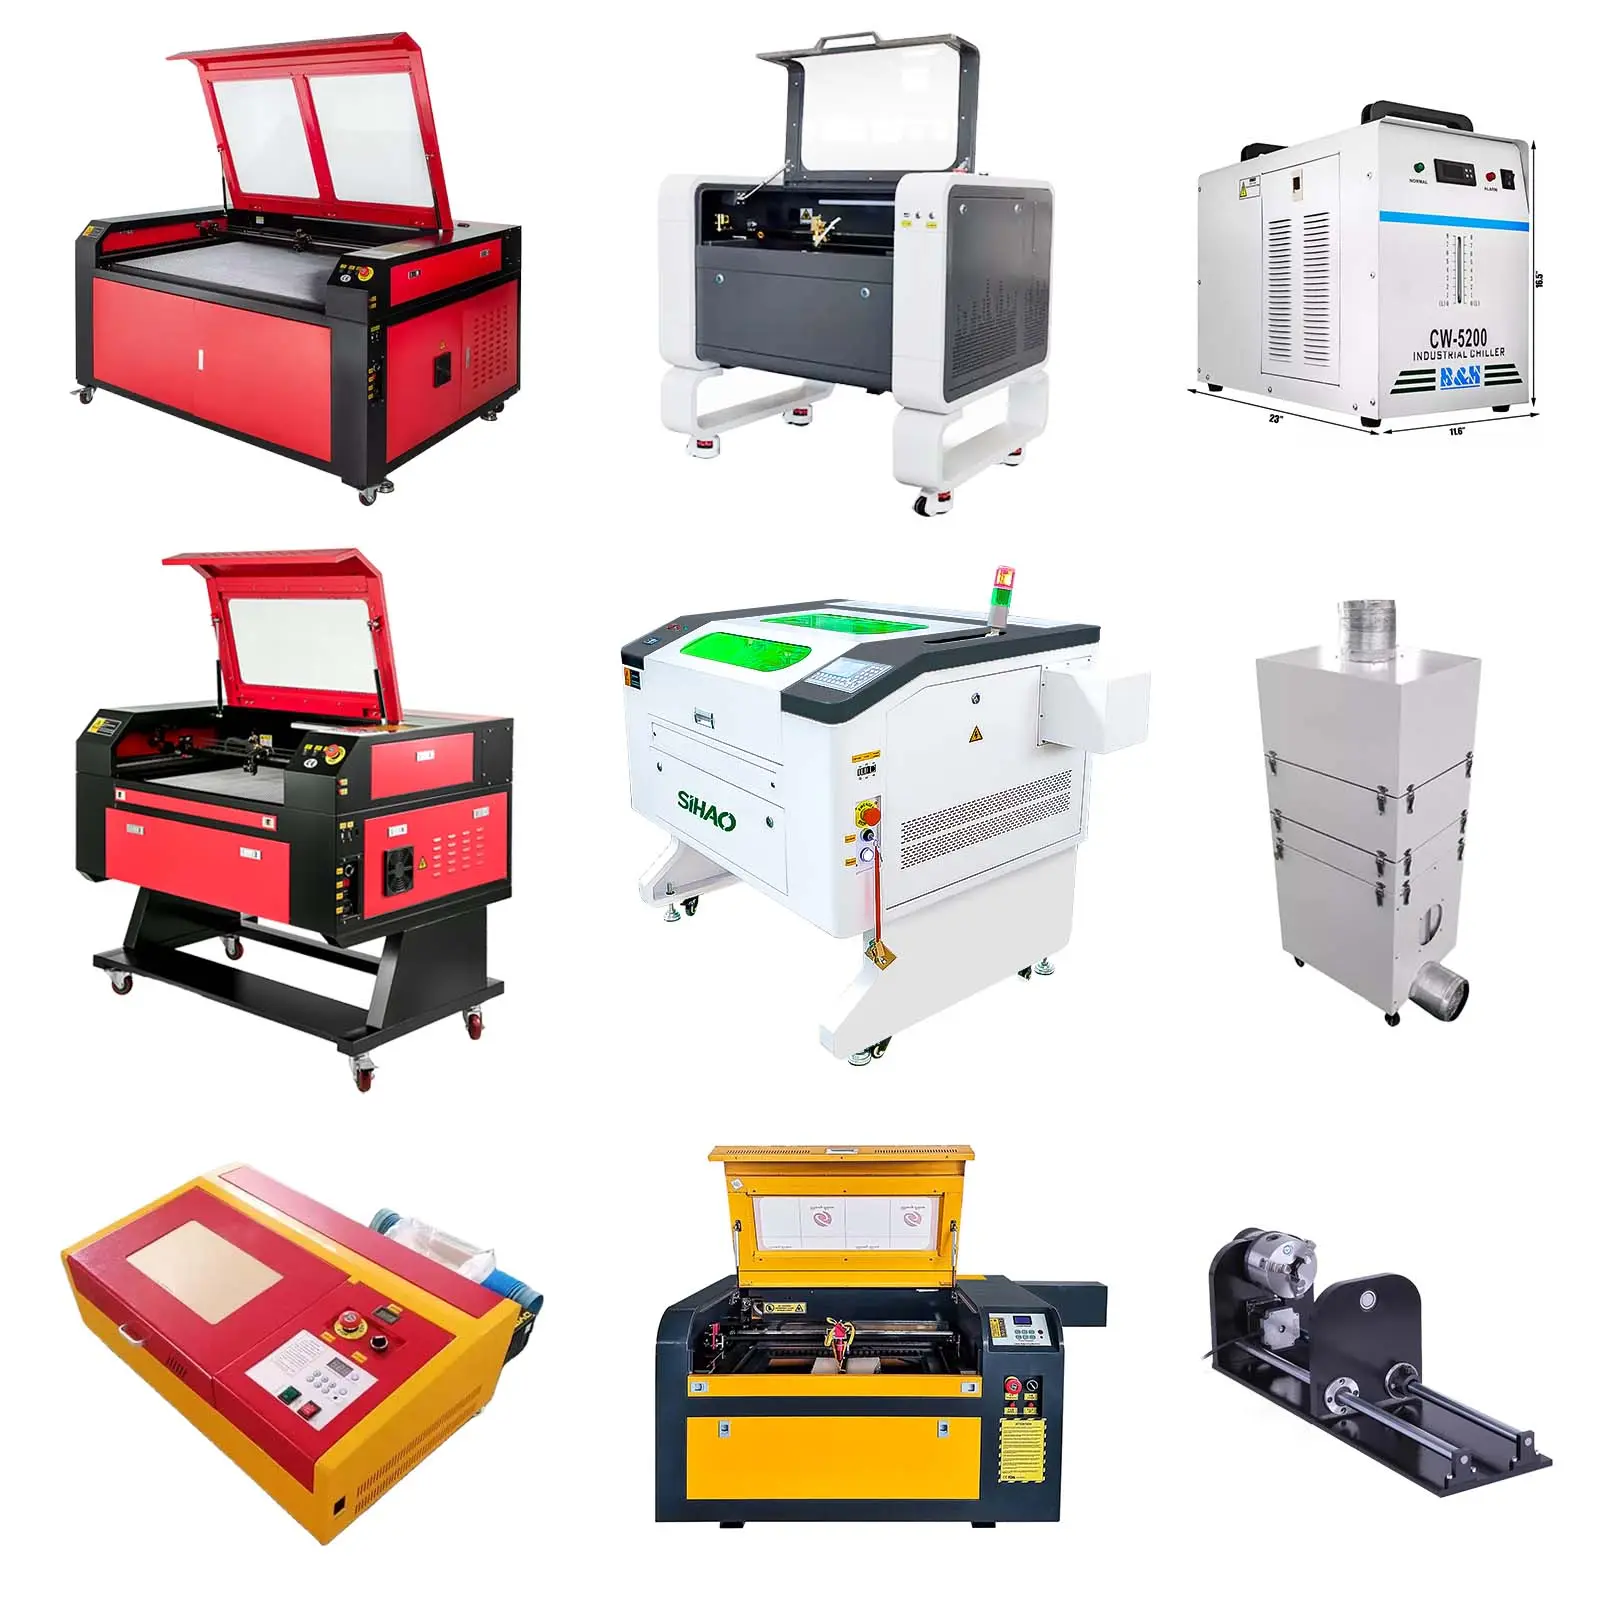 OEM full set of 3d laser crystal stone engraving equipment with rotary axis shaft chiller smoke filter